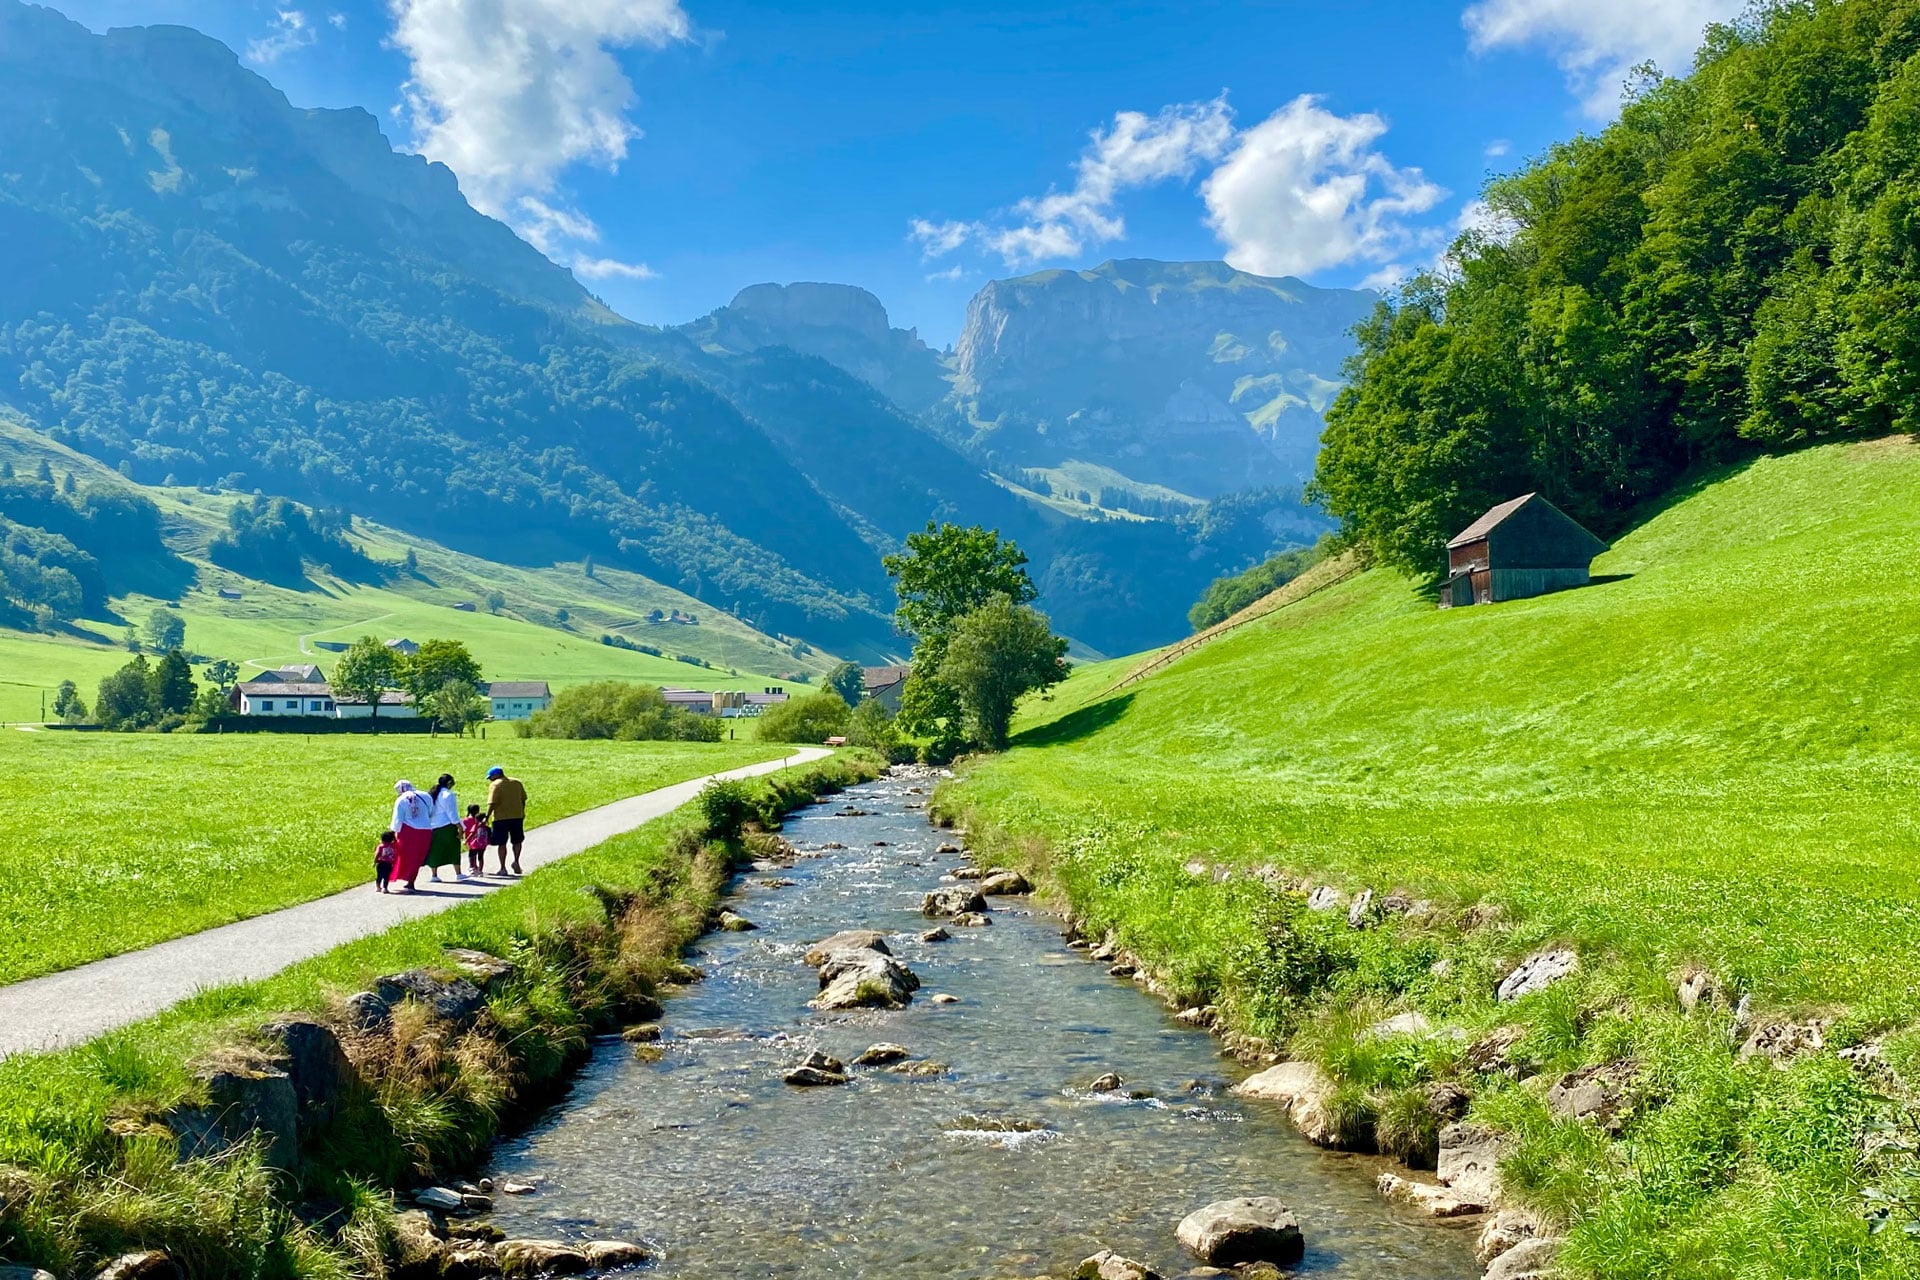 Swiss Farm Experience, Appenzell & Rhine Falls Day Tour (from Basel)